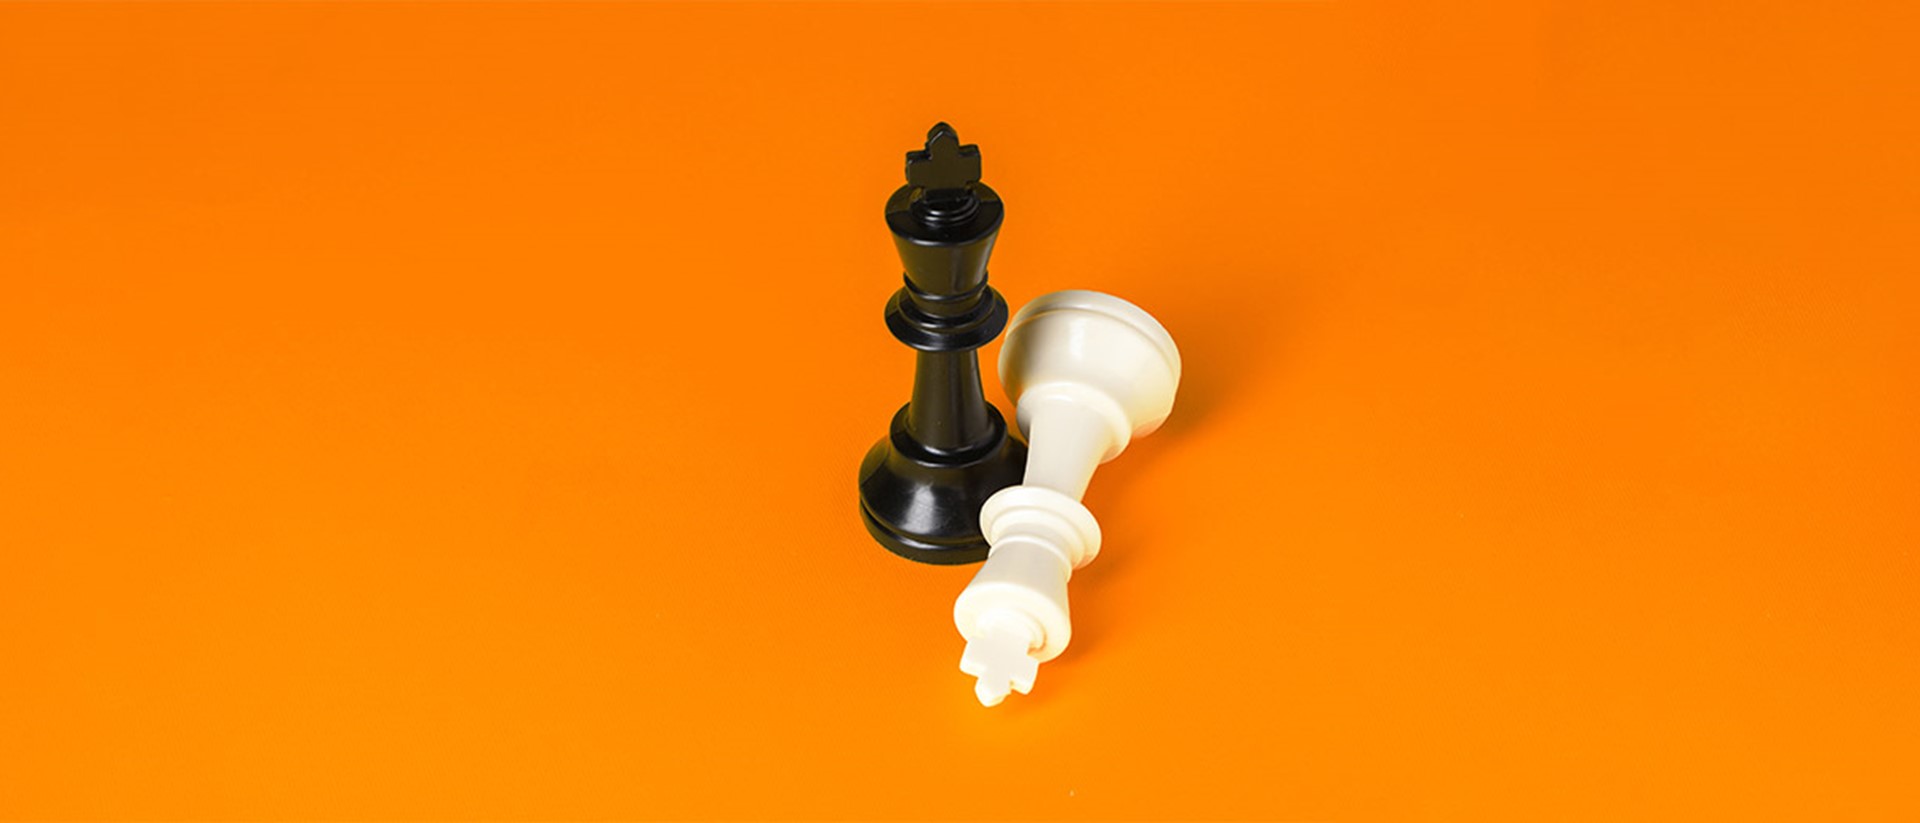 Hero image of chess pieces on an orange background